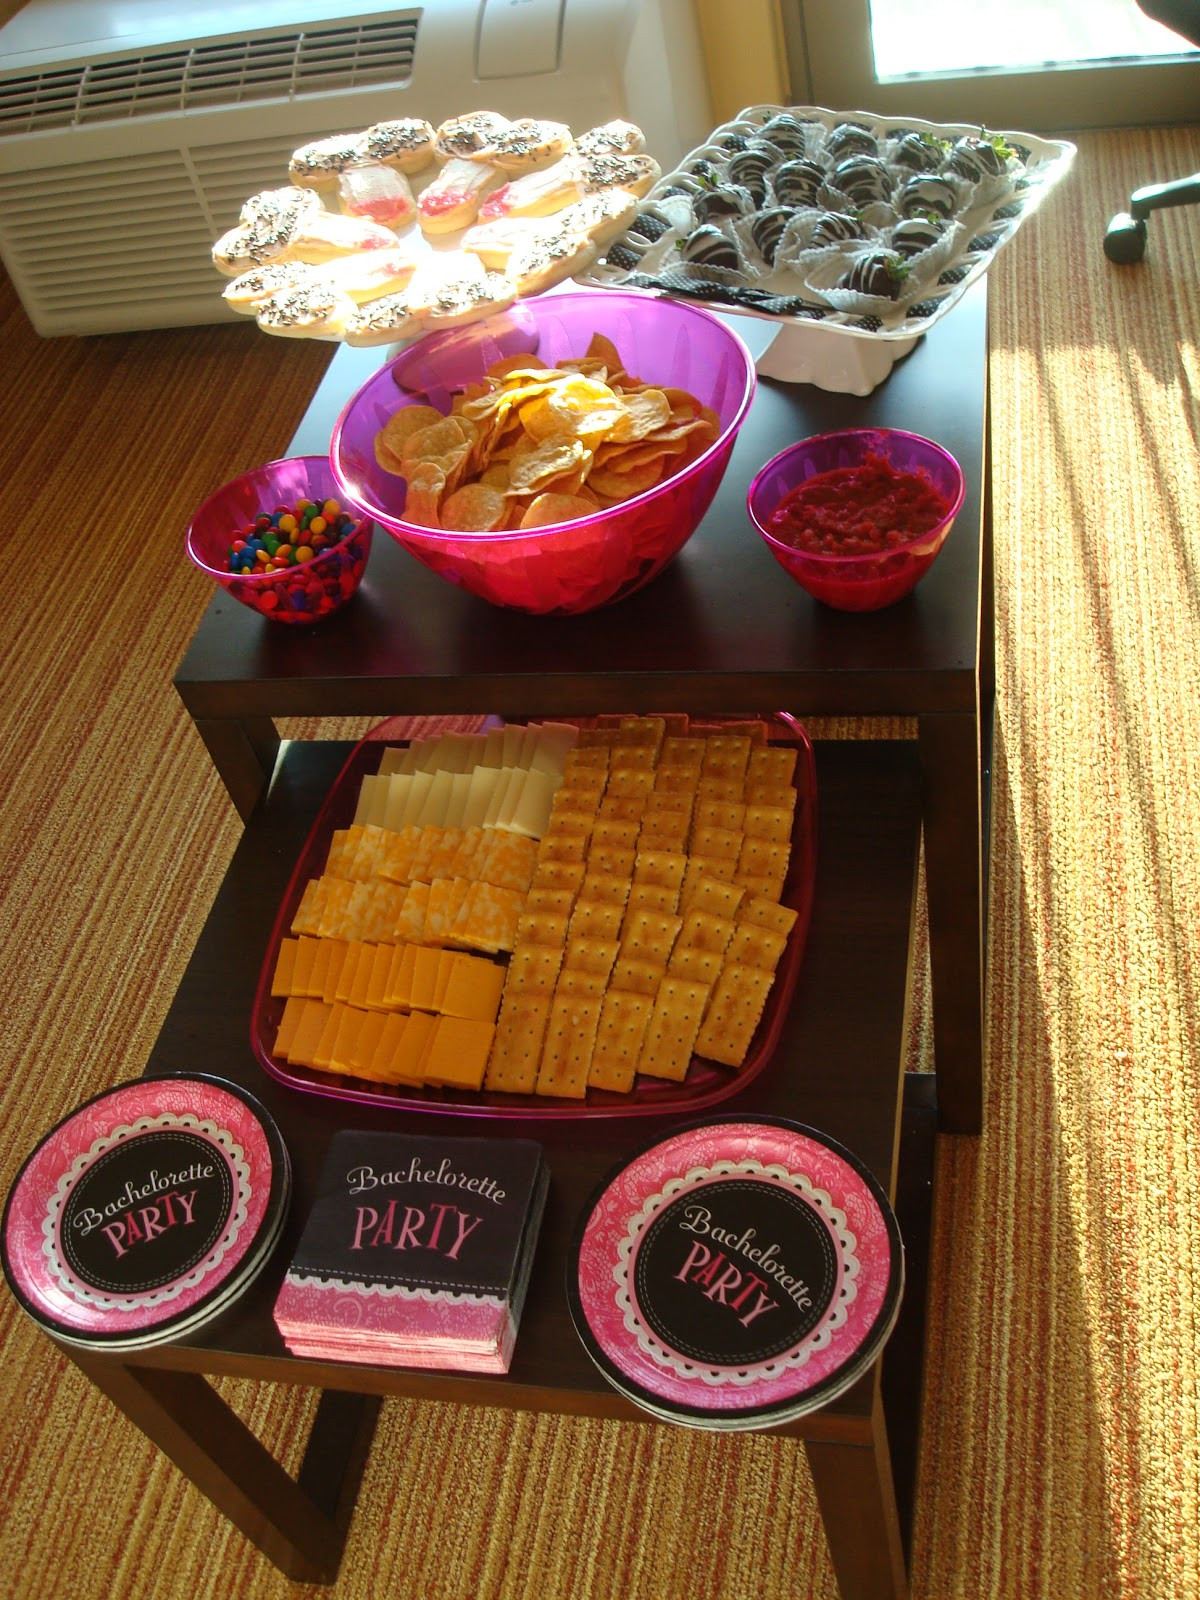 Food Ideas For Bachelorette Party
 The Journey To "We" A Low Key Bachelorette Party